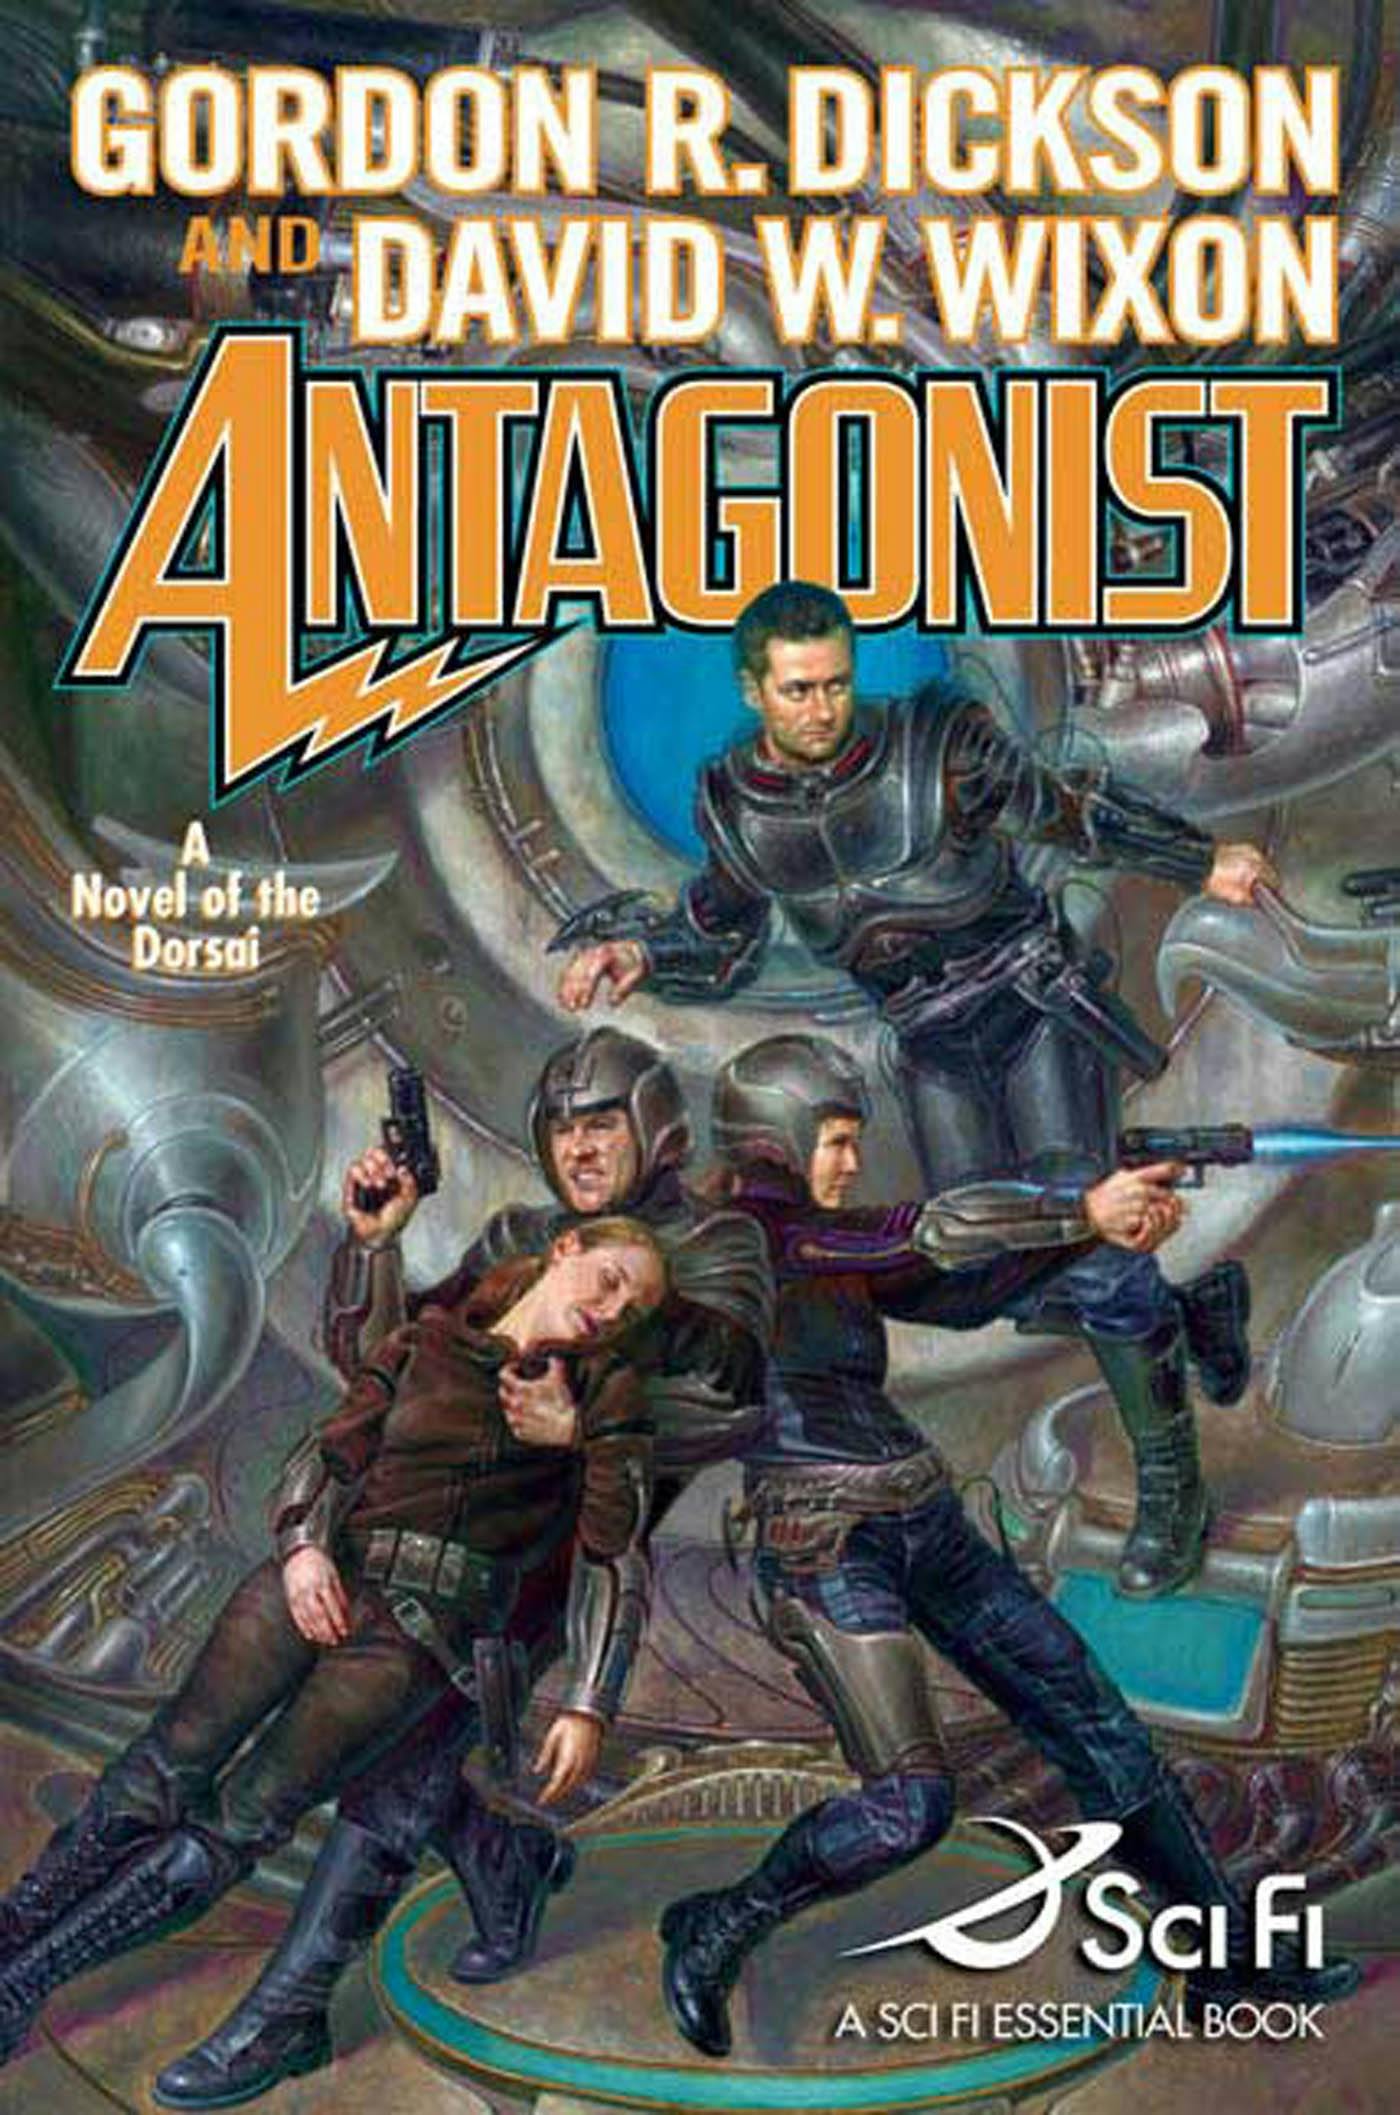 Cover for the book titled as: Antagonist